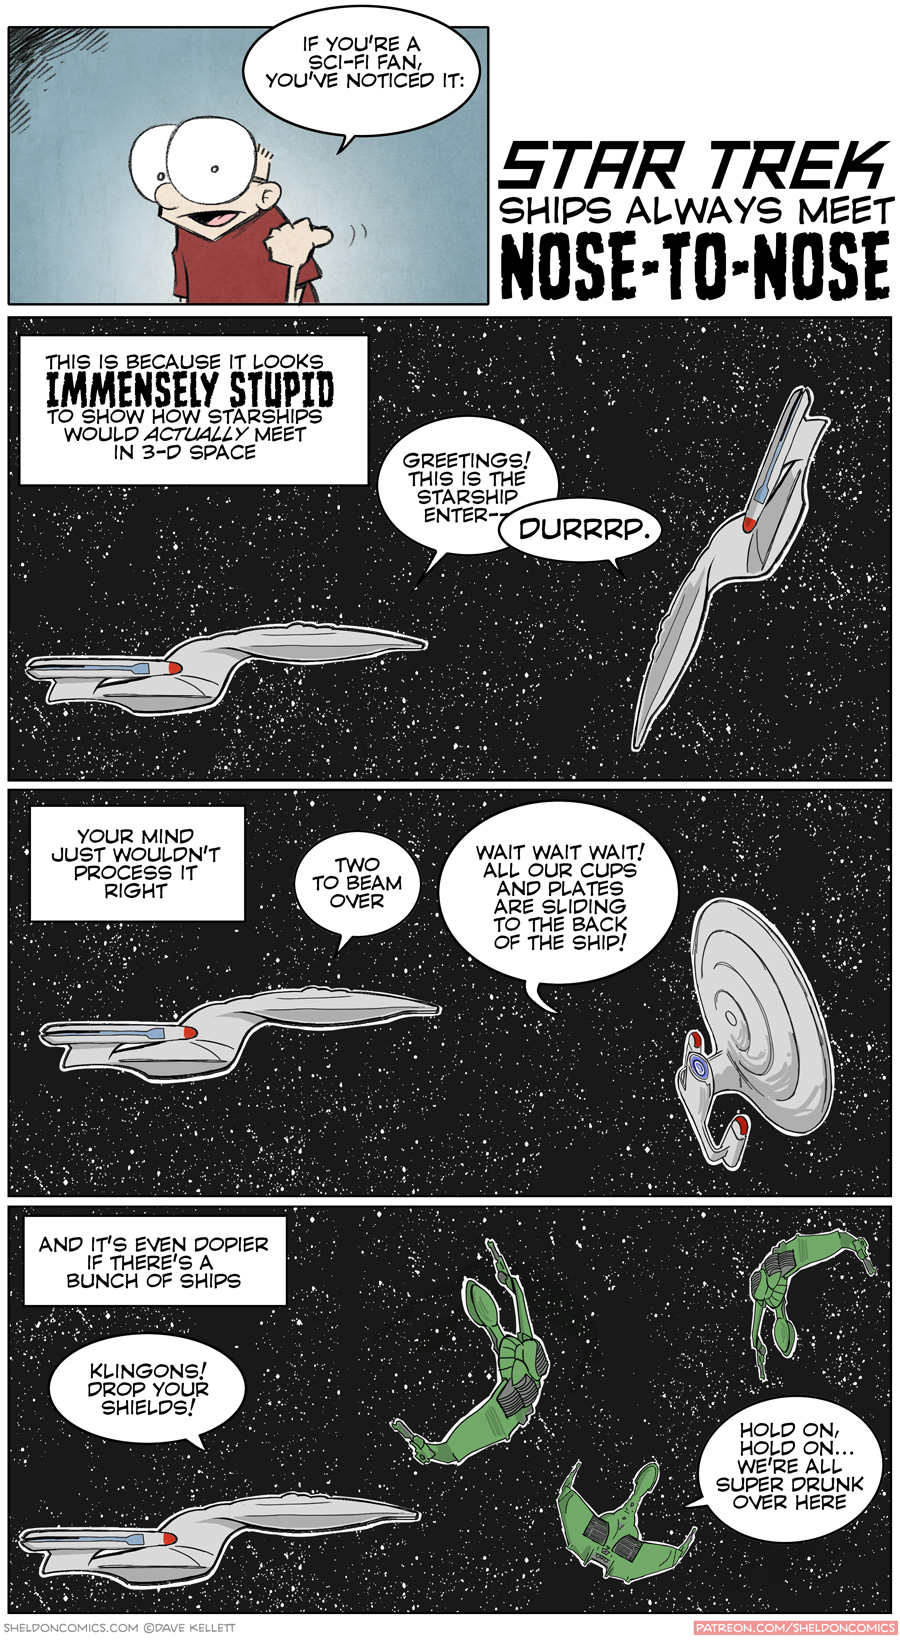 comic-art-explains-why-star-trek-ships-meet-nose-to-nose-in-space